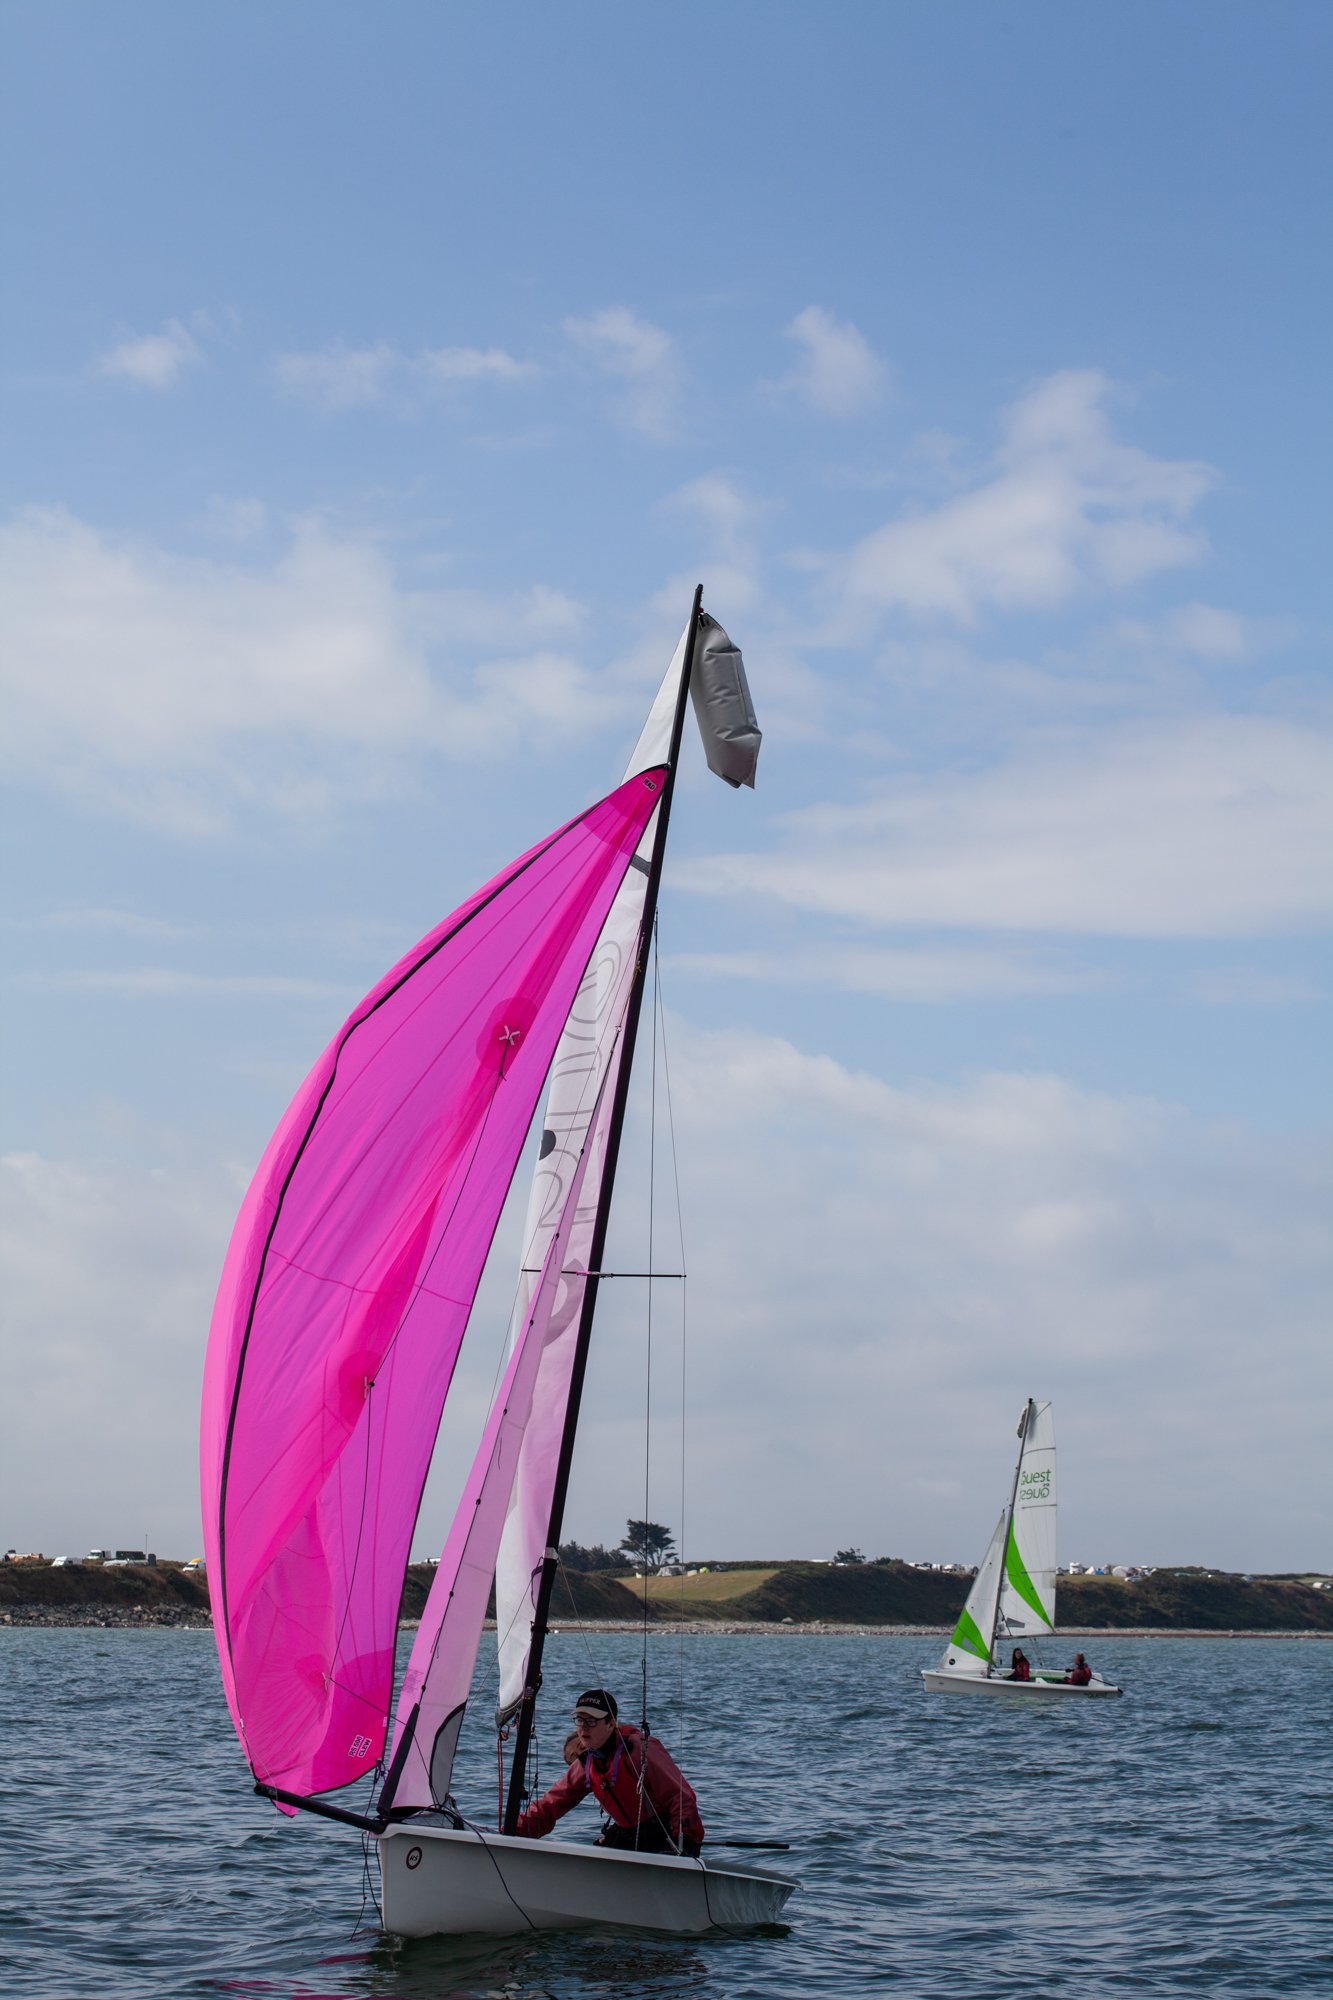 Learning to sail in a pink boat!